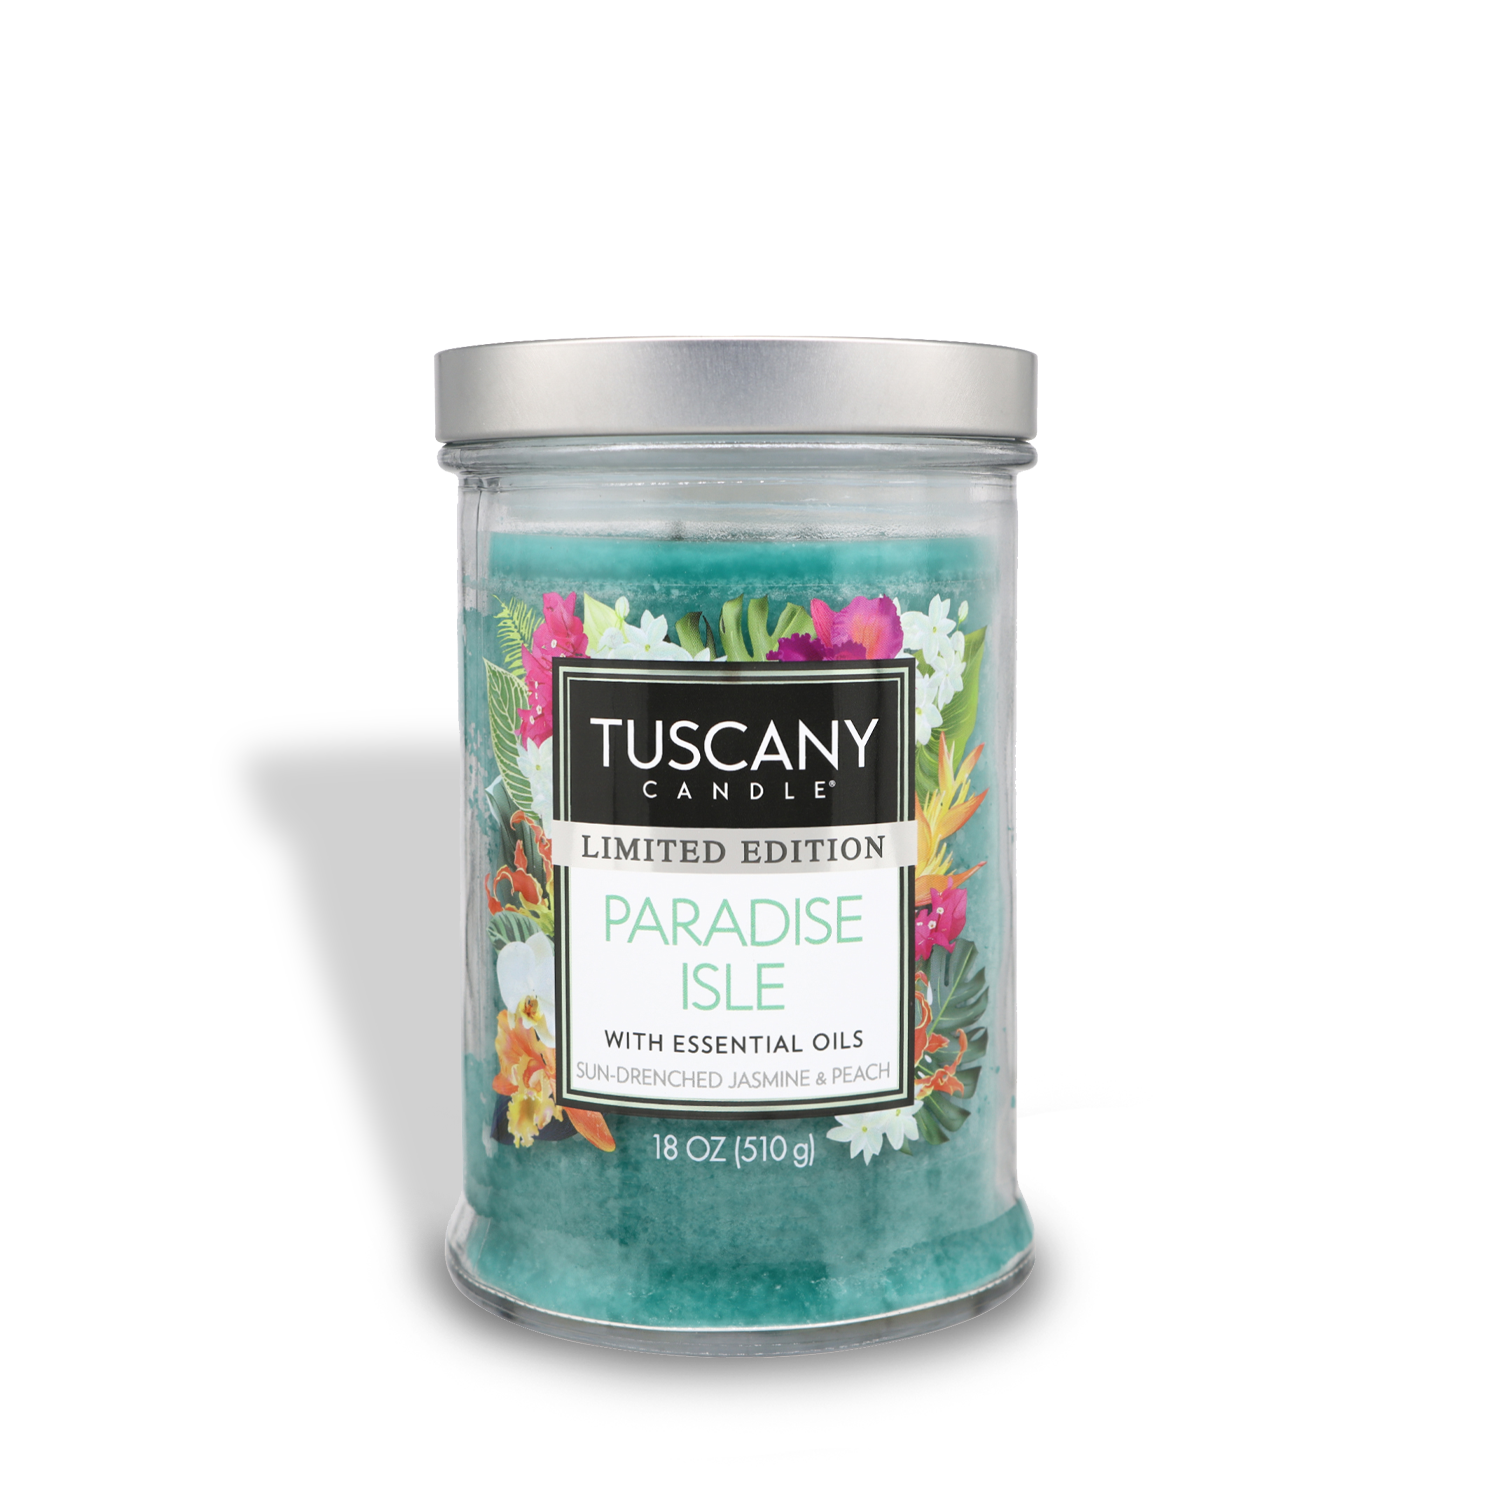 Experience Paradise Isle Long-Lasting Scented Jar Candle (18 oz) by Tuscany Candle® SEASONAL, creating a sensory journey to a tropical haven.